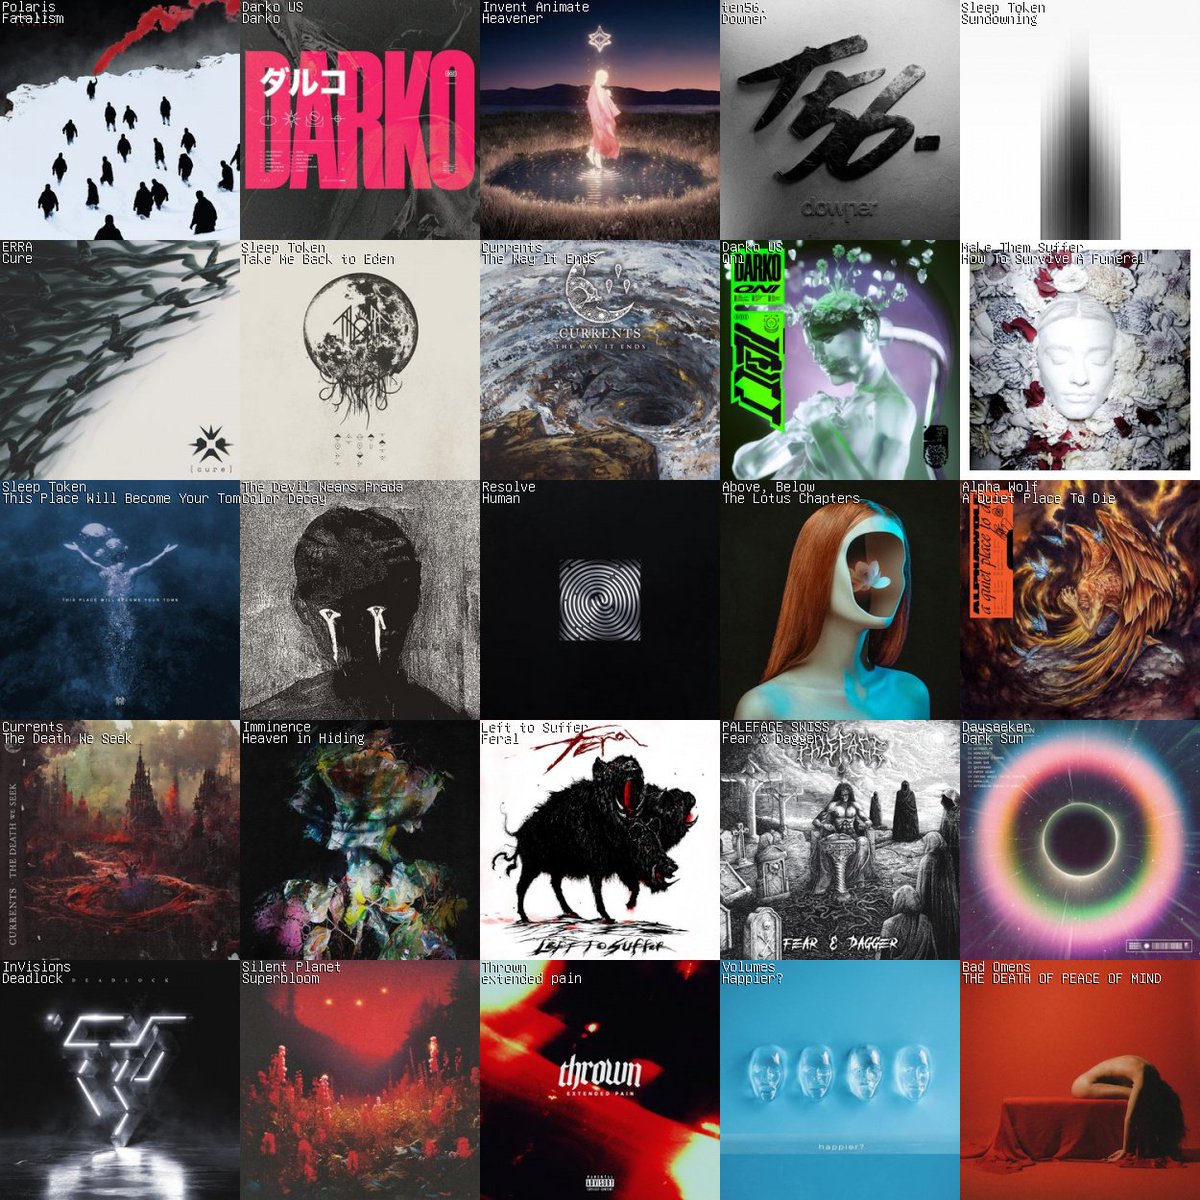 @rachellereacts @Invent_Animate @156Silence @knockedloose @GAGBOSTON @LMTF @Distinguisher_ @bodysnatcherfl @fitforanautopsy @chamber615 @EXTORTIONISTnw not as MUCH variance as i thought between artists but still a solid 5x5 for me